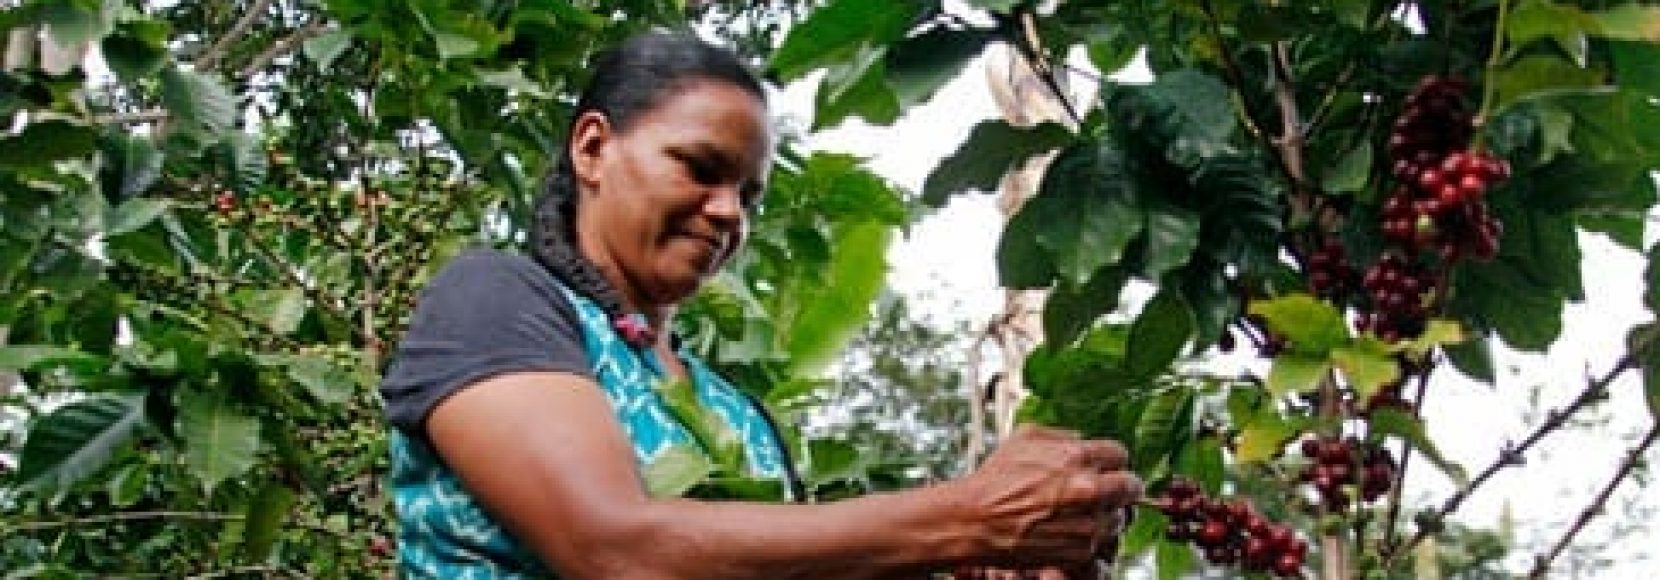 Woman picking coffee cherries into a basket